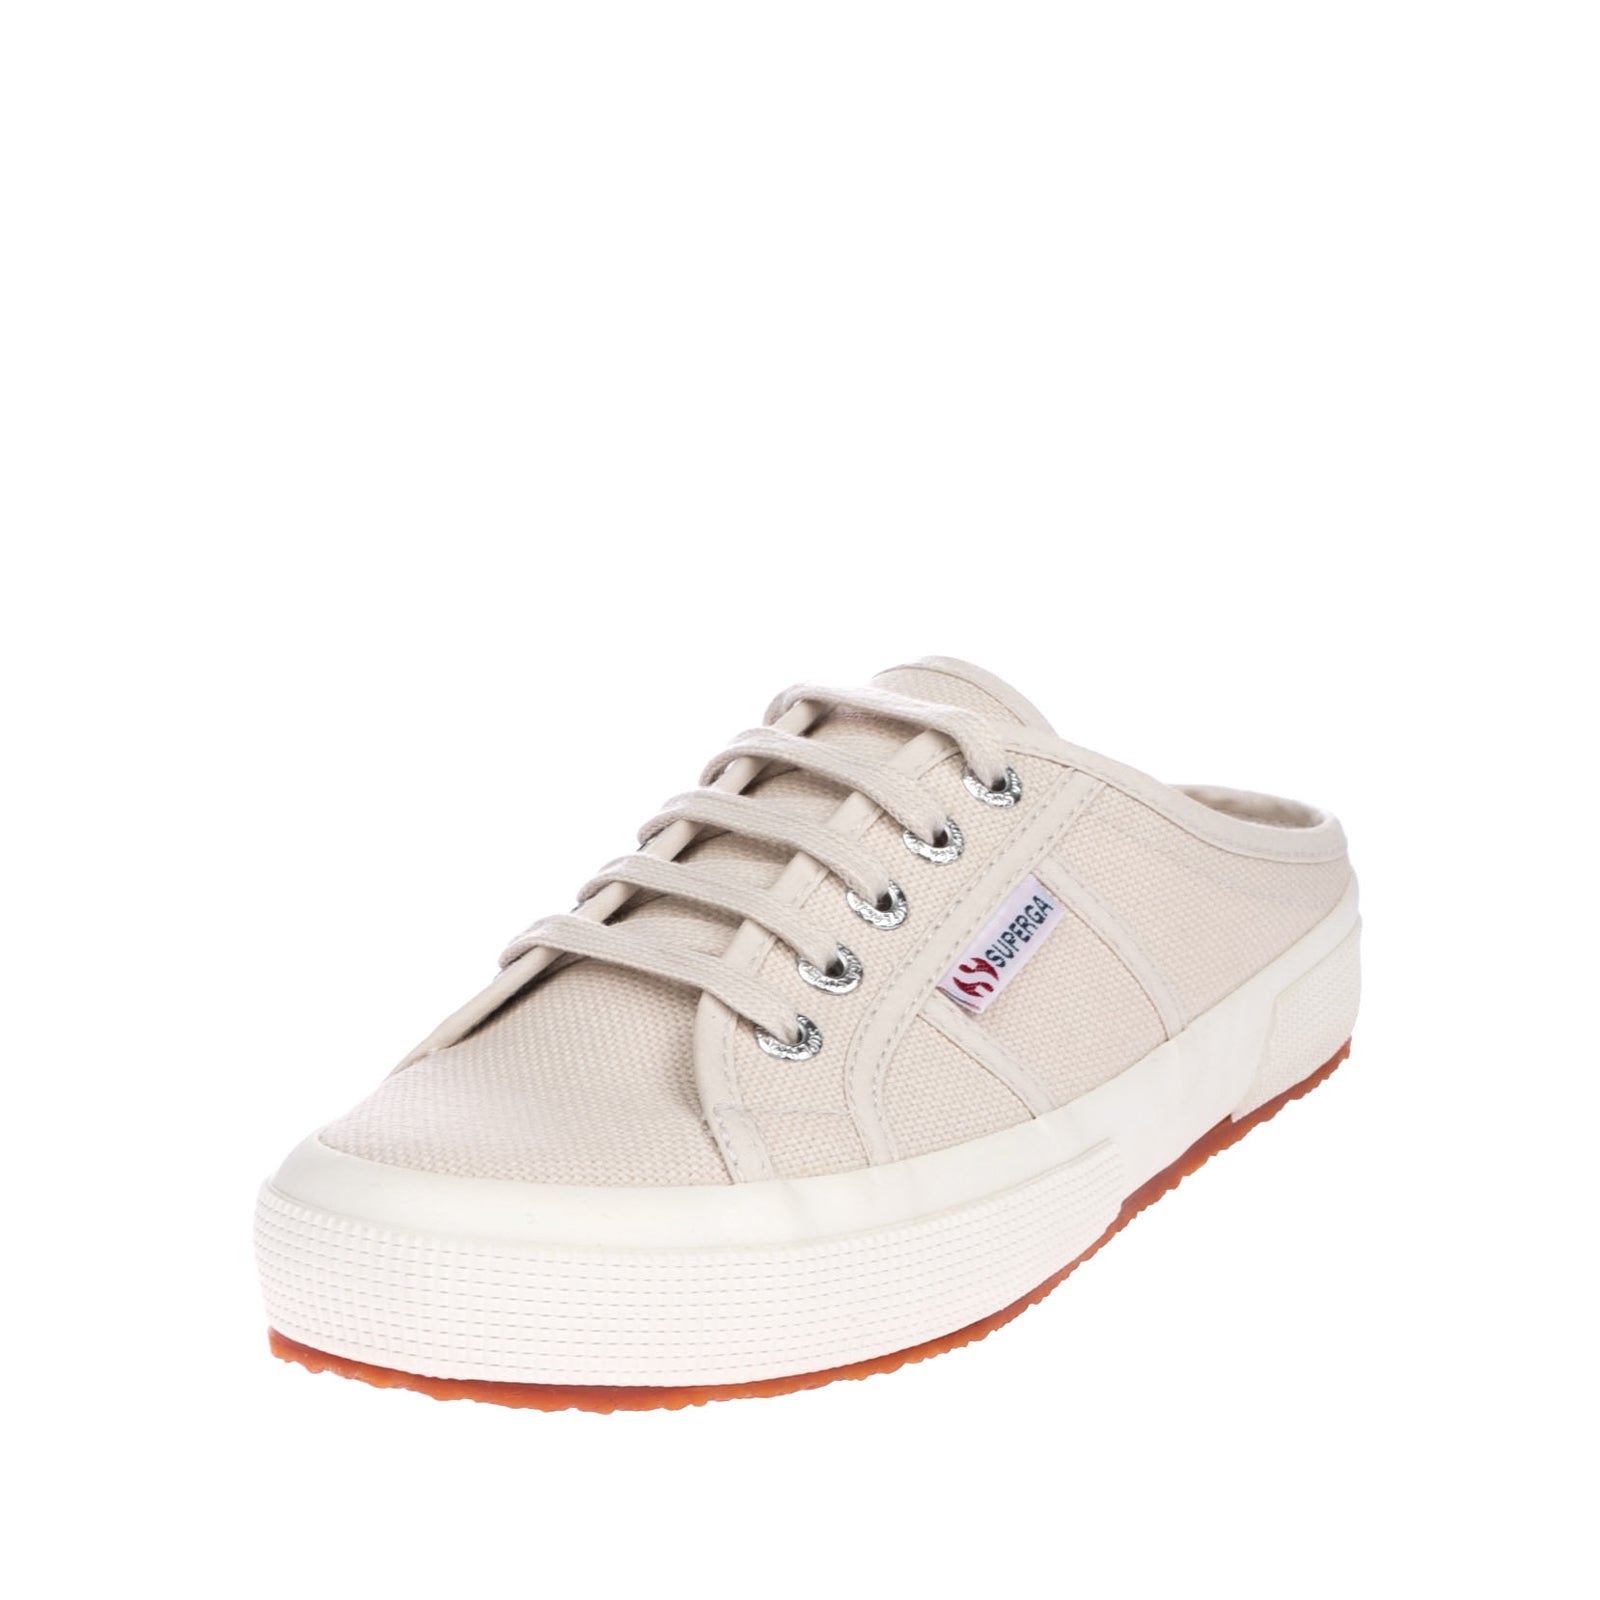 SUPERGA Canvas Mule Sneakers Size 37 UK 4 US 6.5 Branded Grommets Logo Patch gallery main photo